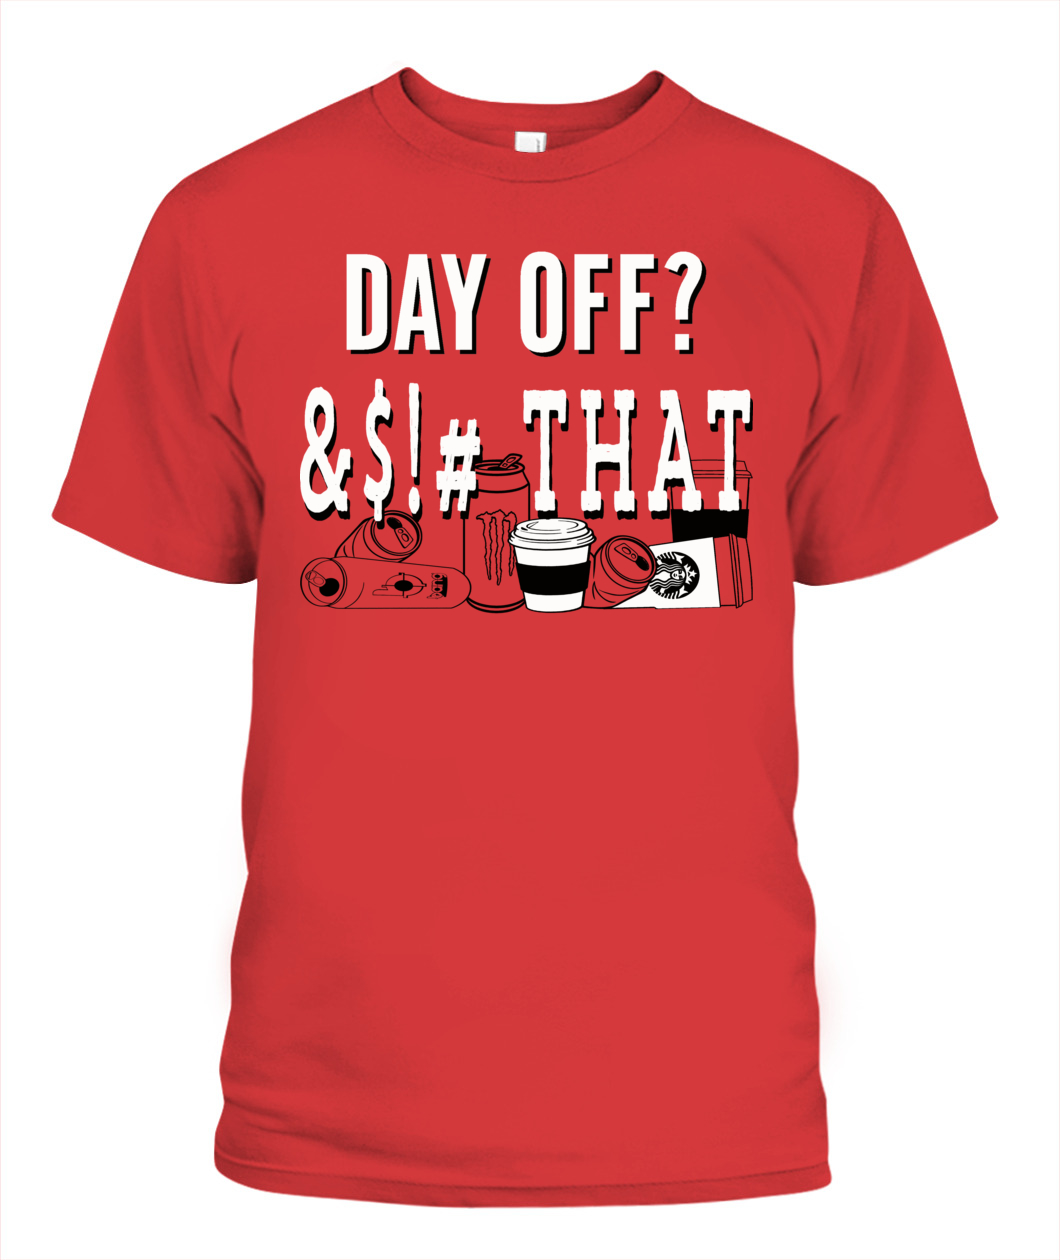 day off nationals shirt